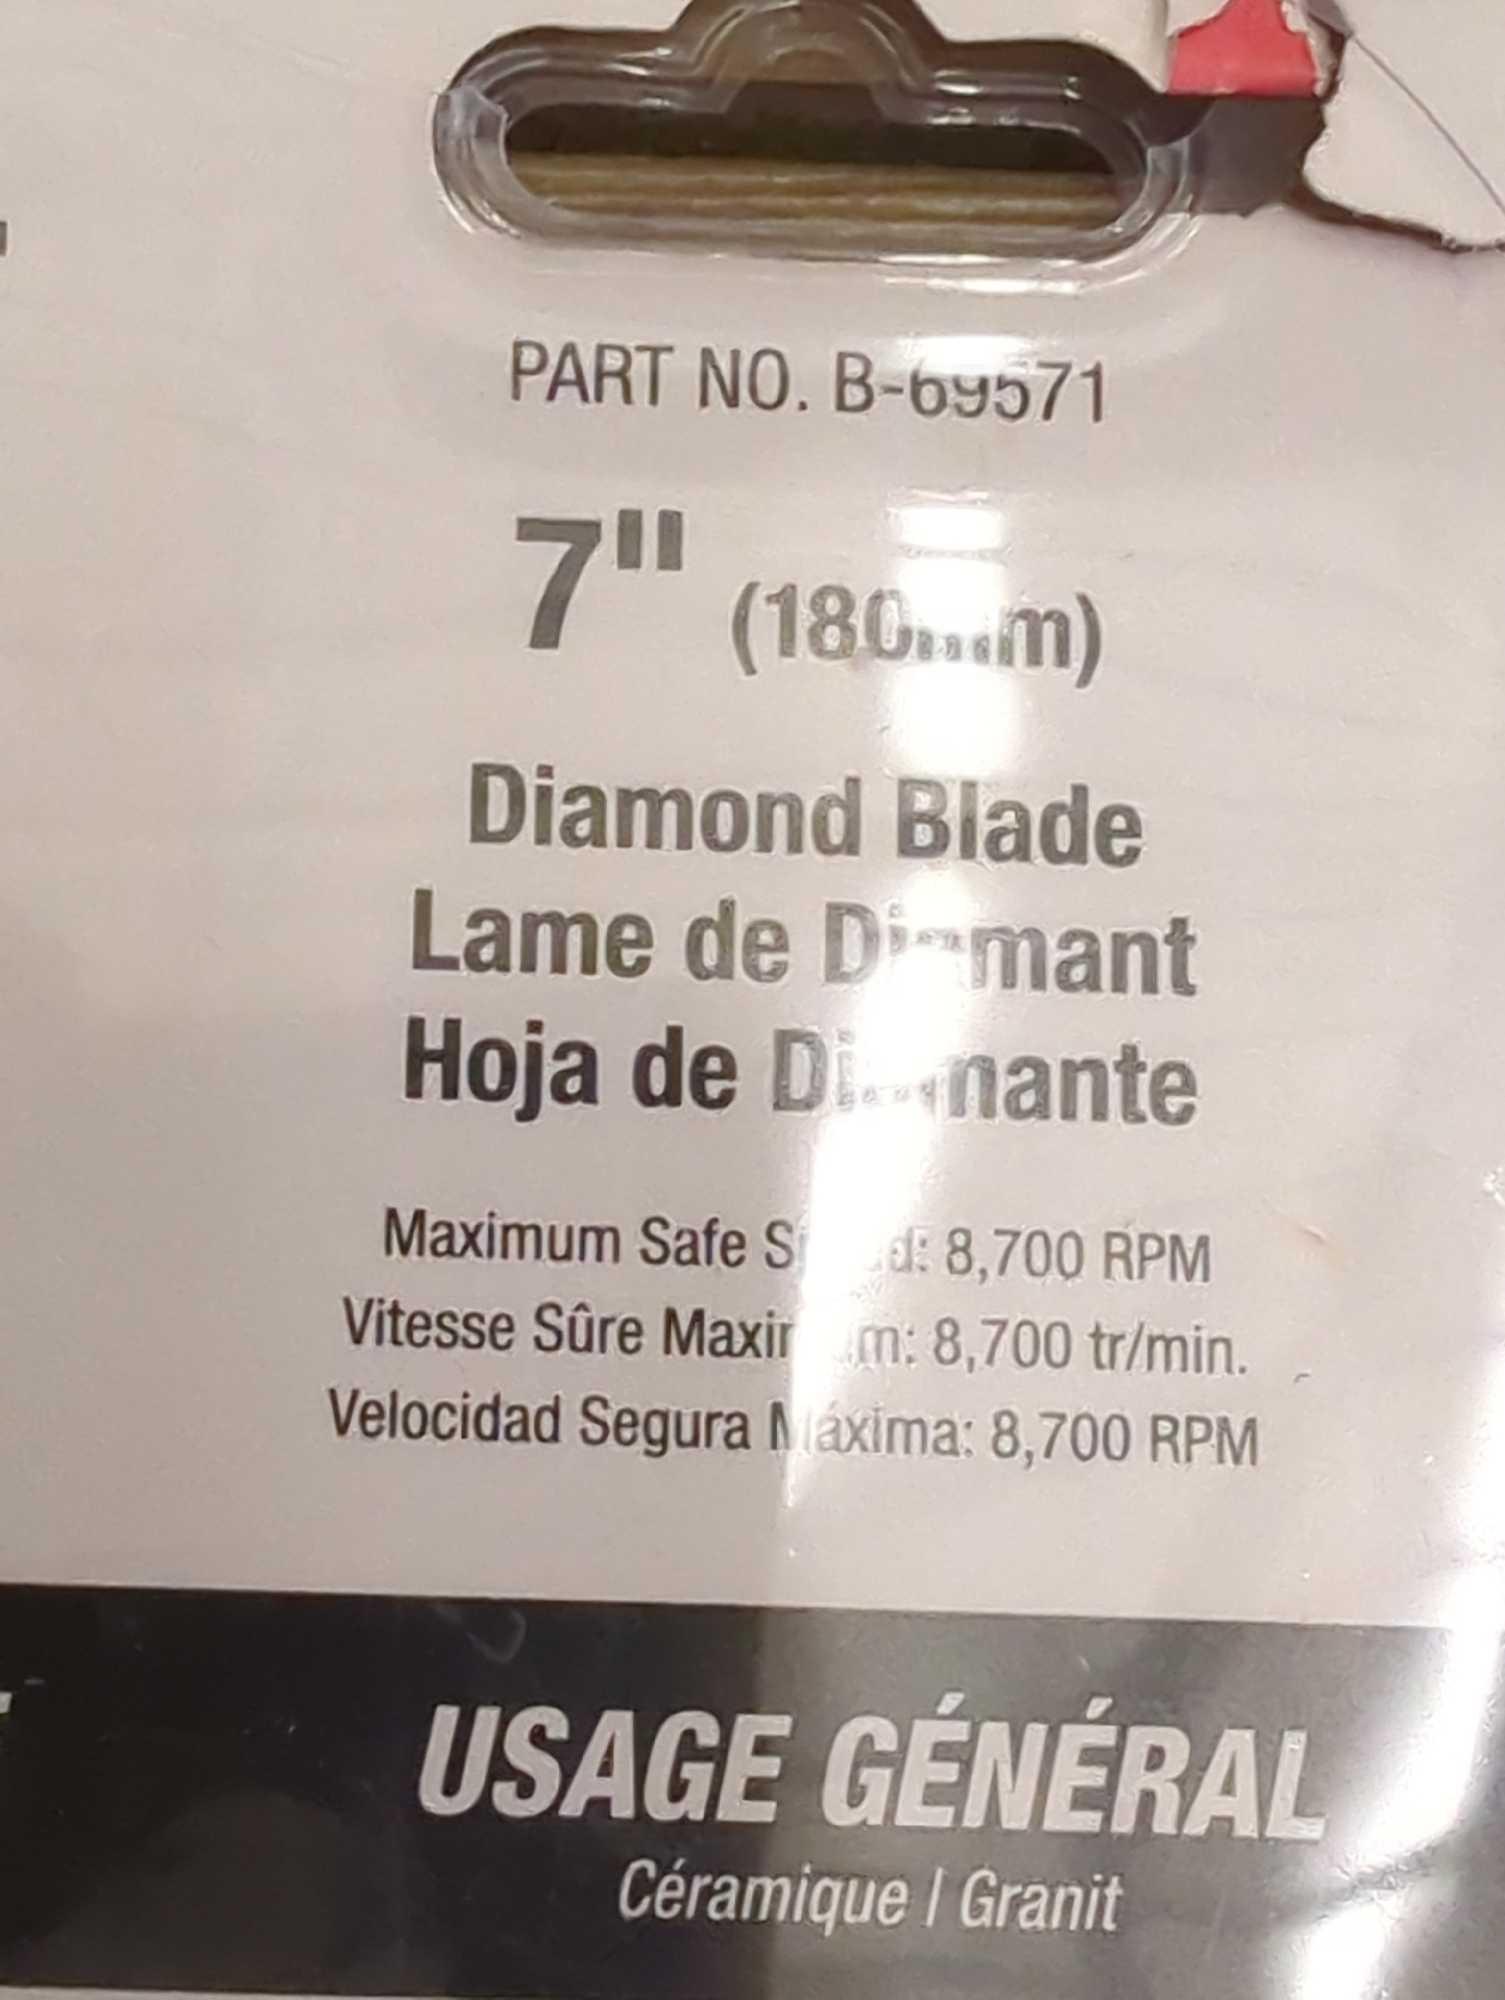 Makita 7 in. Continuous Rim Diamond Blade for General Purpose, Appears to be New in Factory Sealed